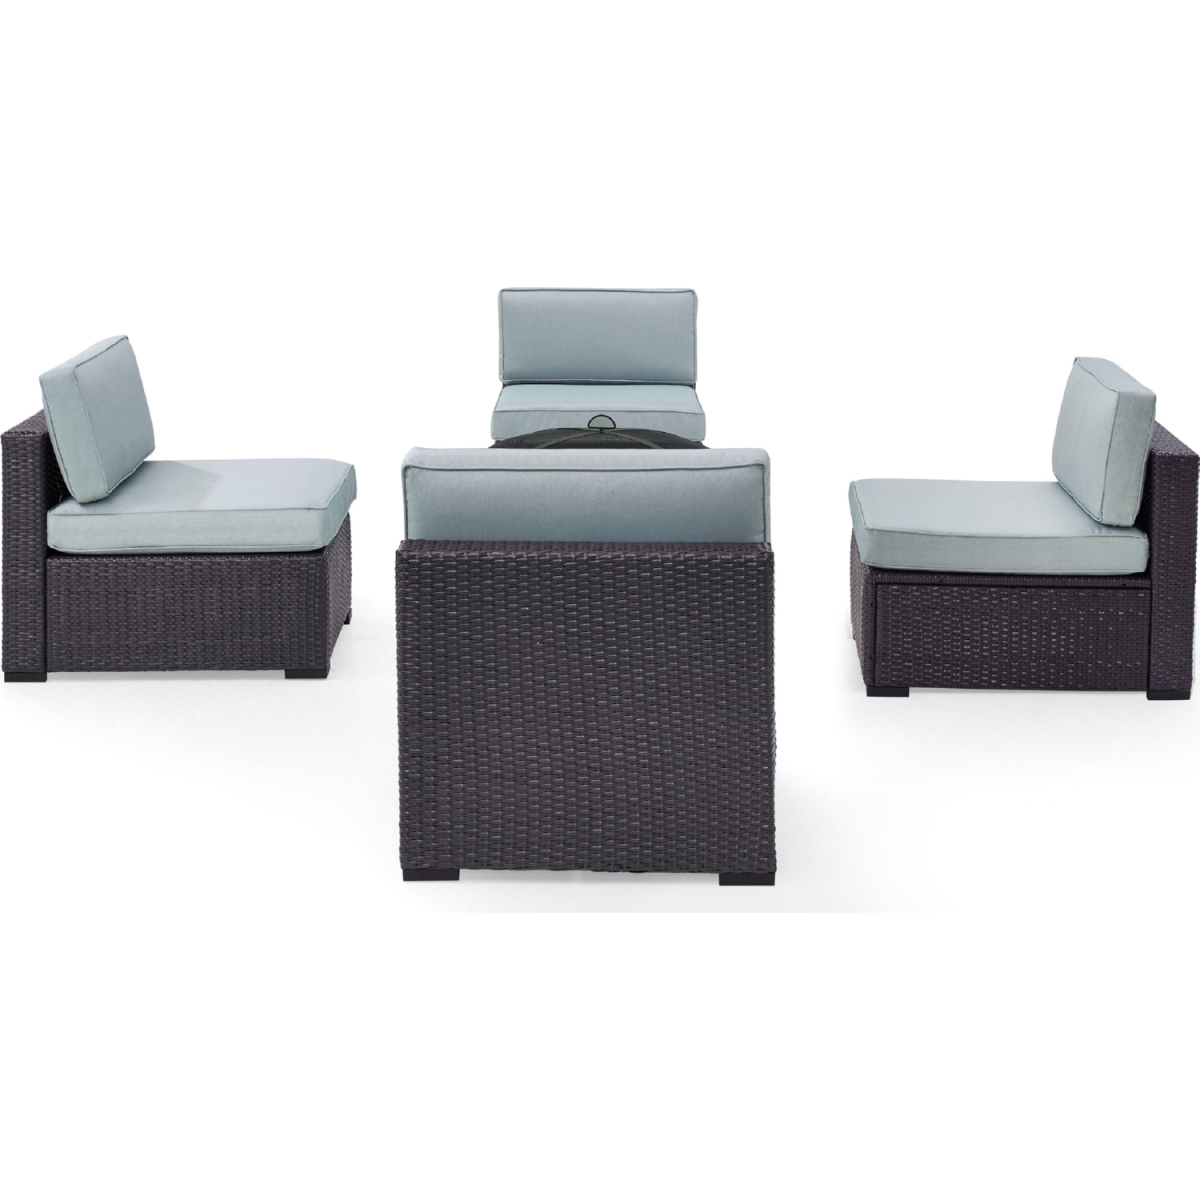 Ko70122br-mi Biscayne 4 Person Outdoor Wicker Seating Set, Mist - Four Armless Chairs, Ashland Firepit